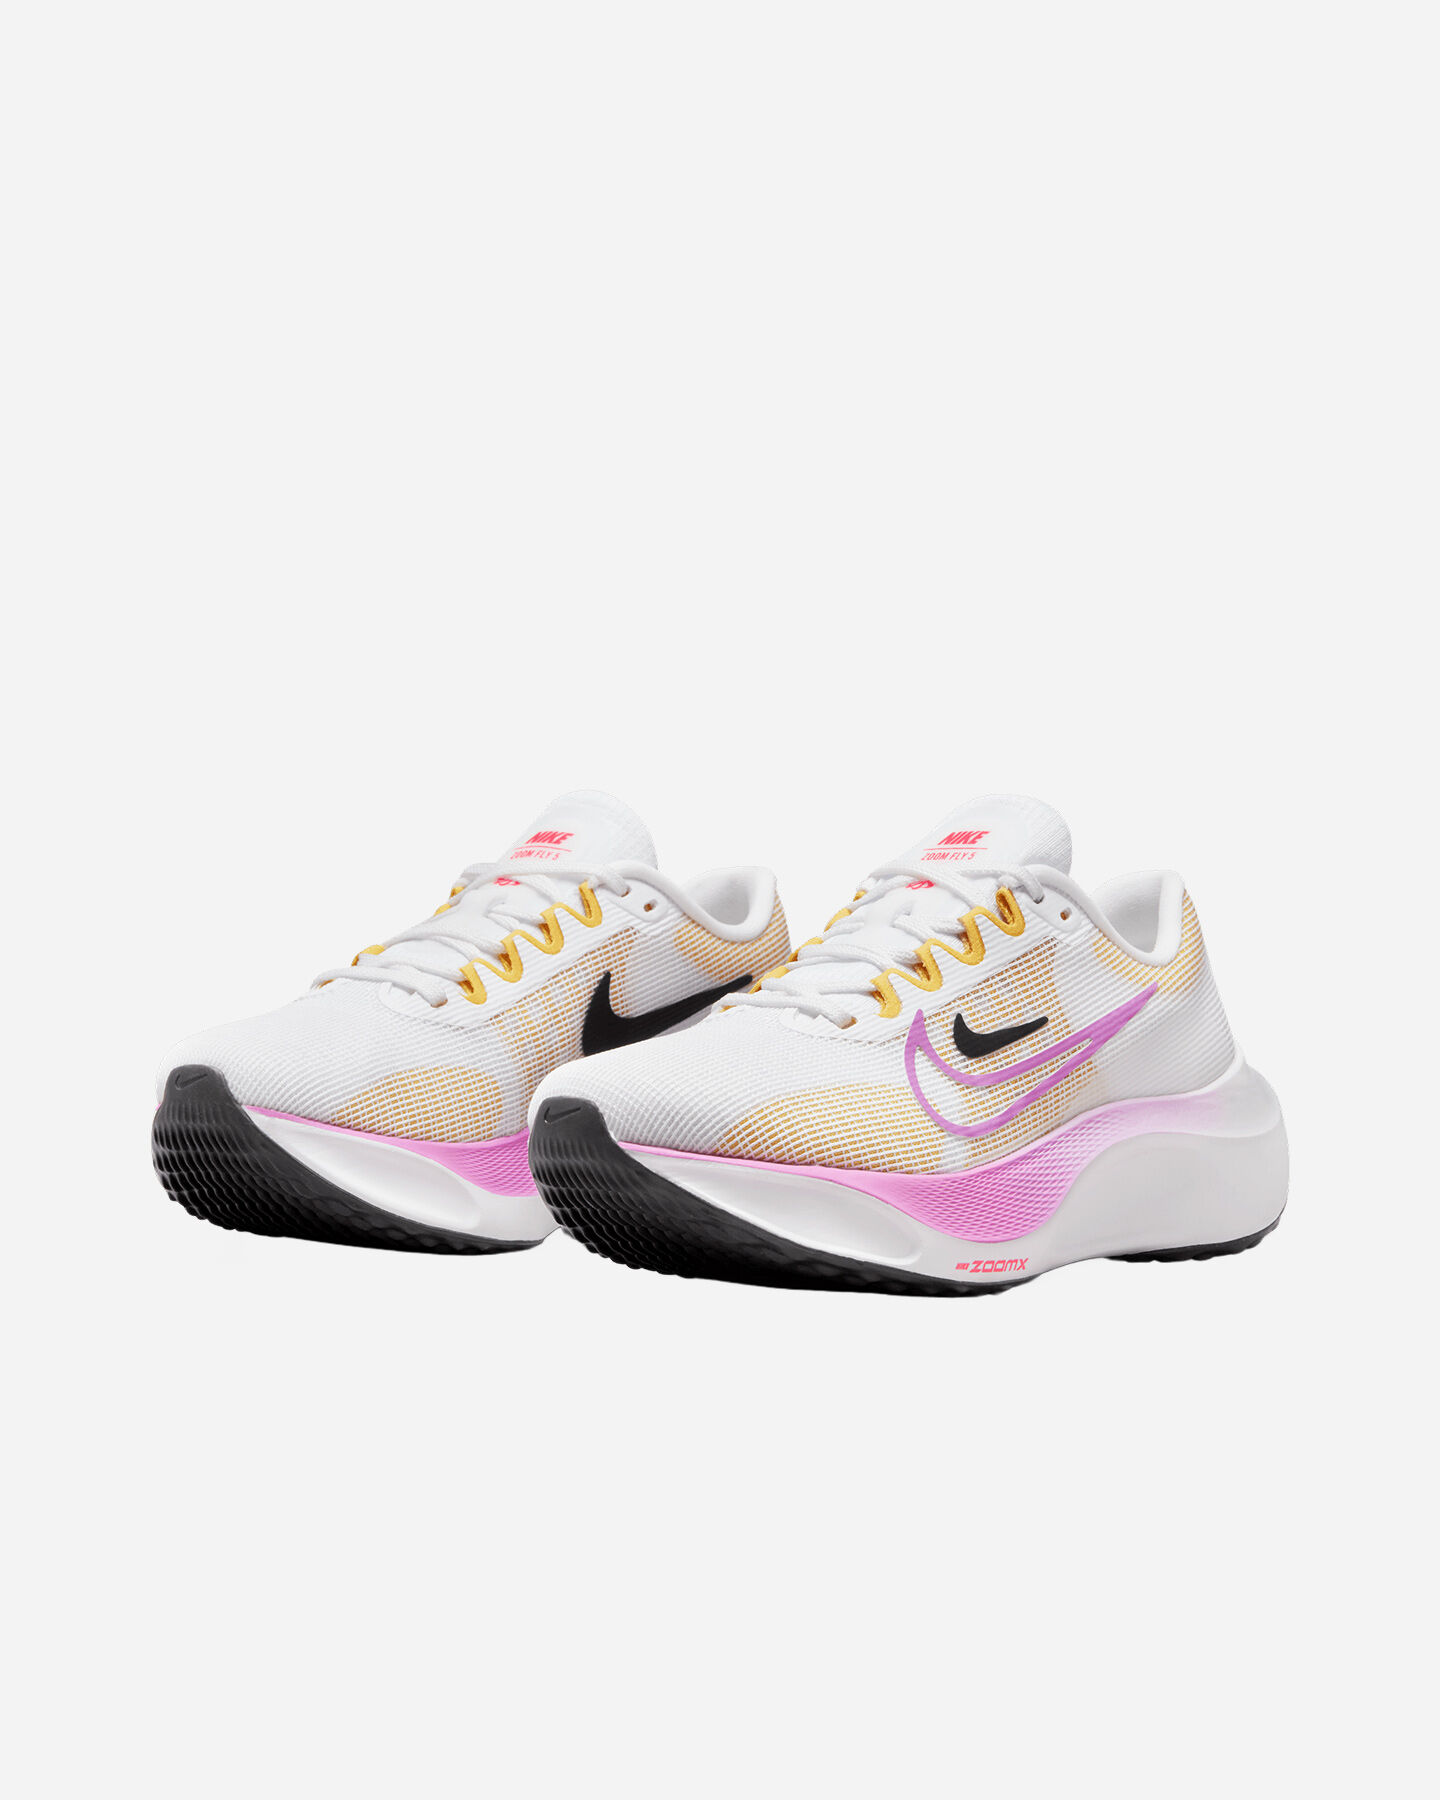  Scarpe running NIKE ZOOM FLY 5 W S5586173|100|6 scatto 1